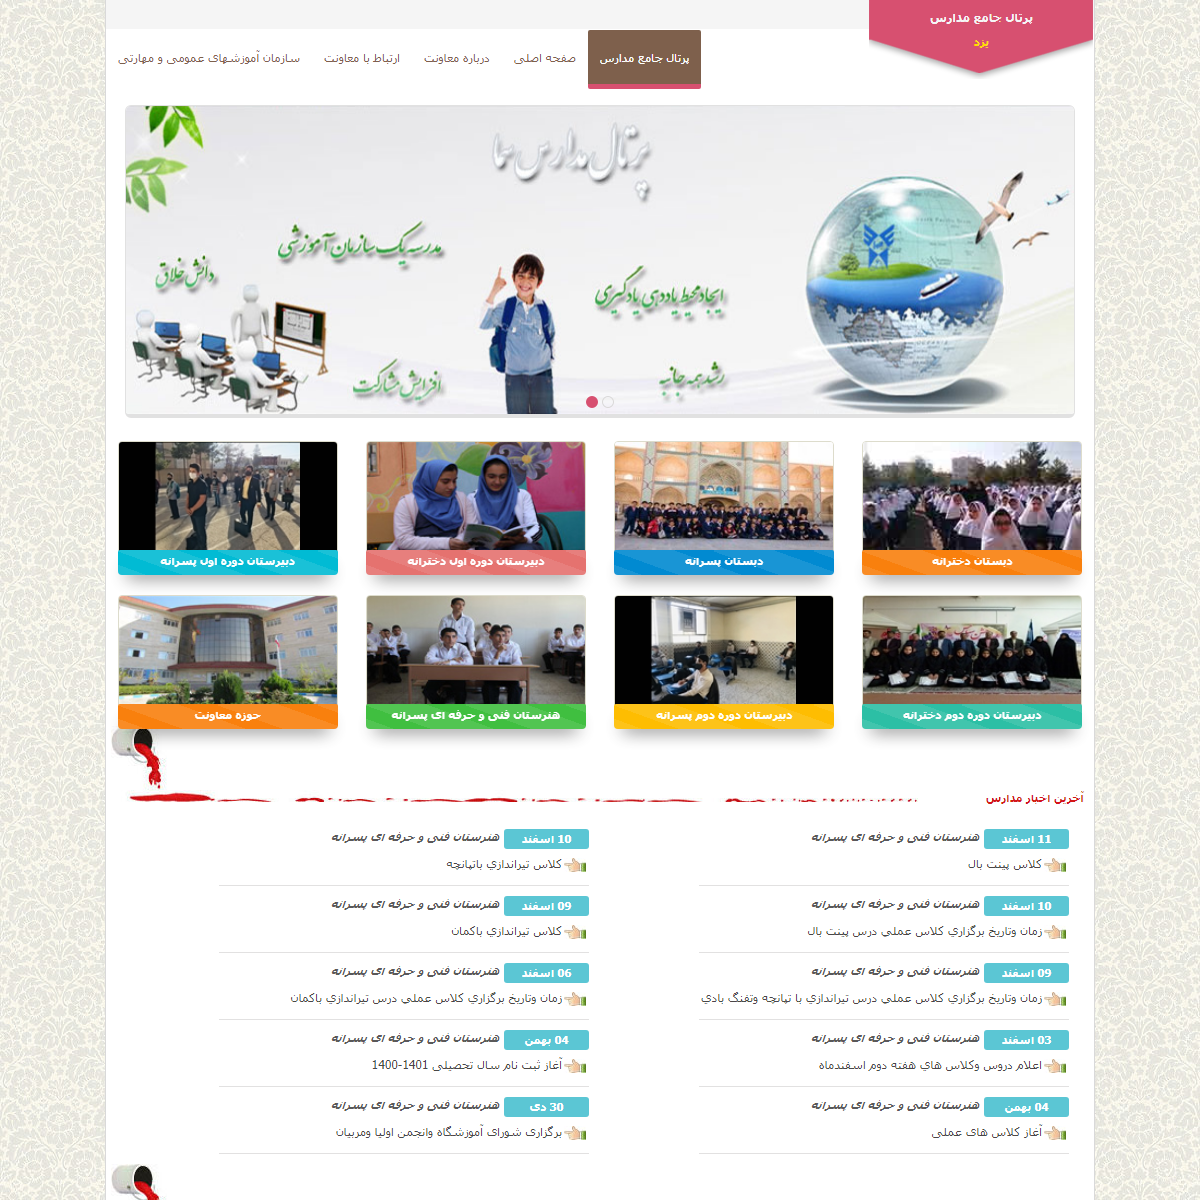 A complete backup of http://yazd.samaschools.ir/HomePage/HomeForty.aspx